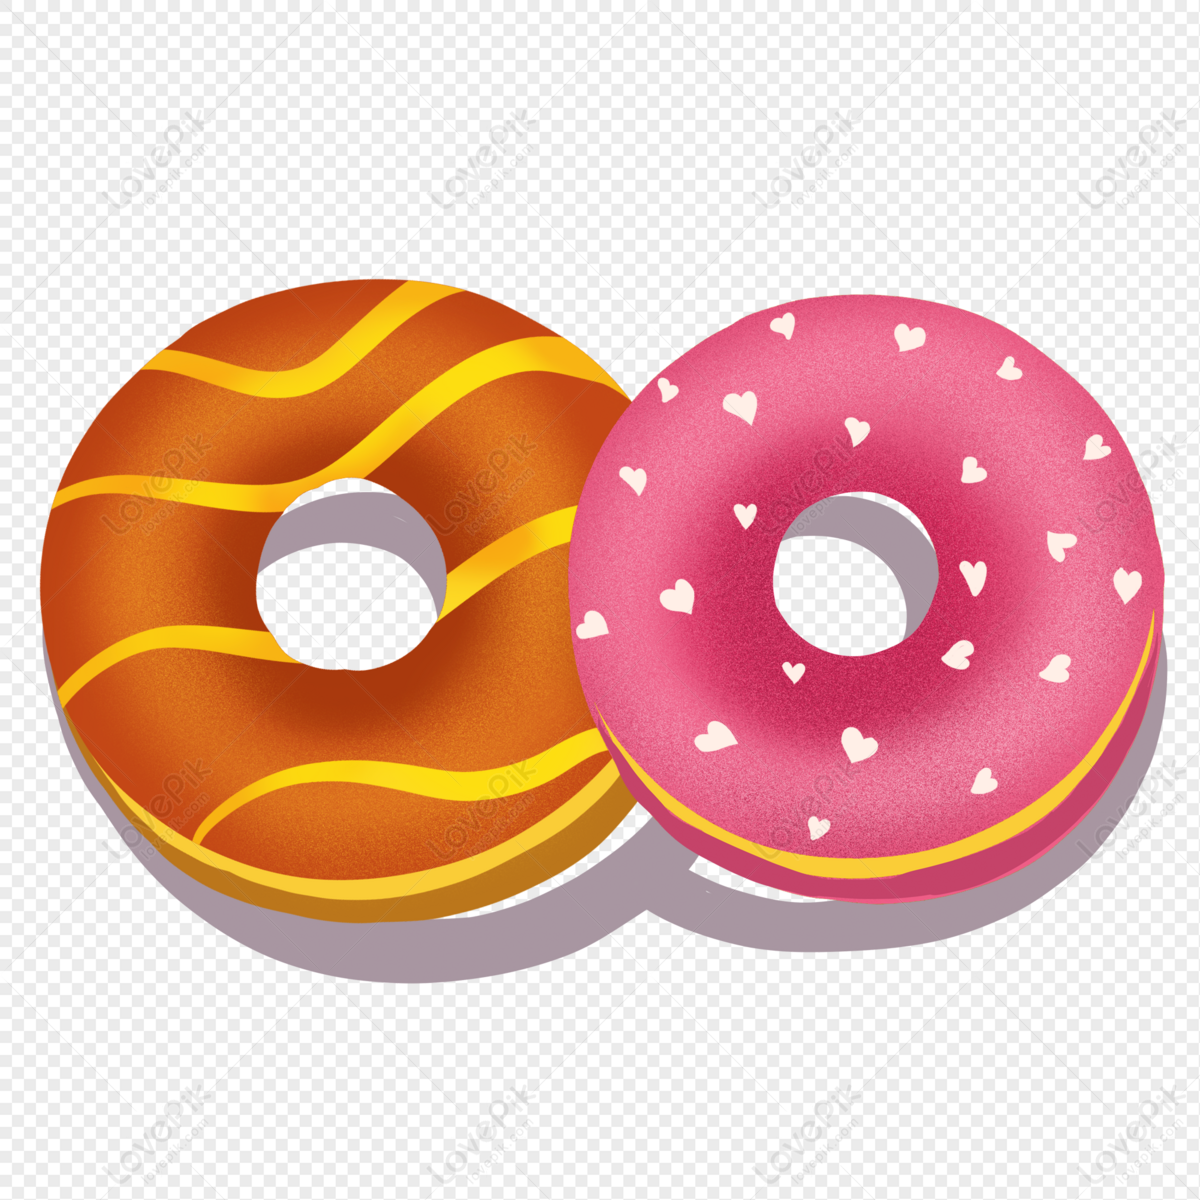 Cartoon Two Donuts Illustration PNG Transparent Image And Clipart Image For  Free Download - Lovepik | 401531537